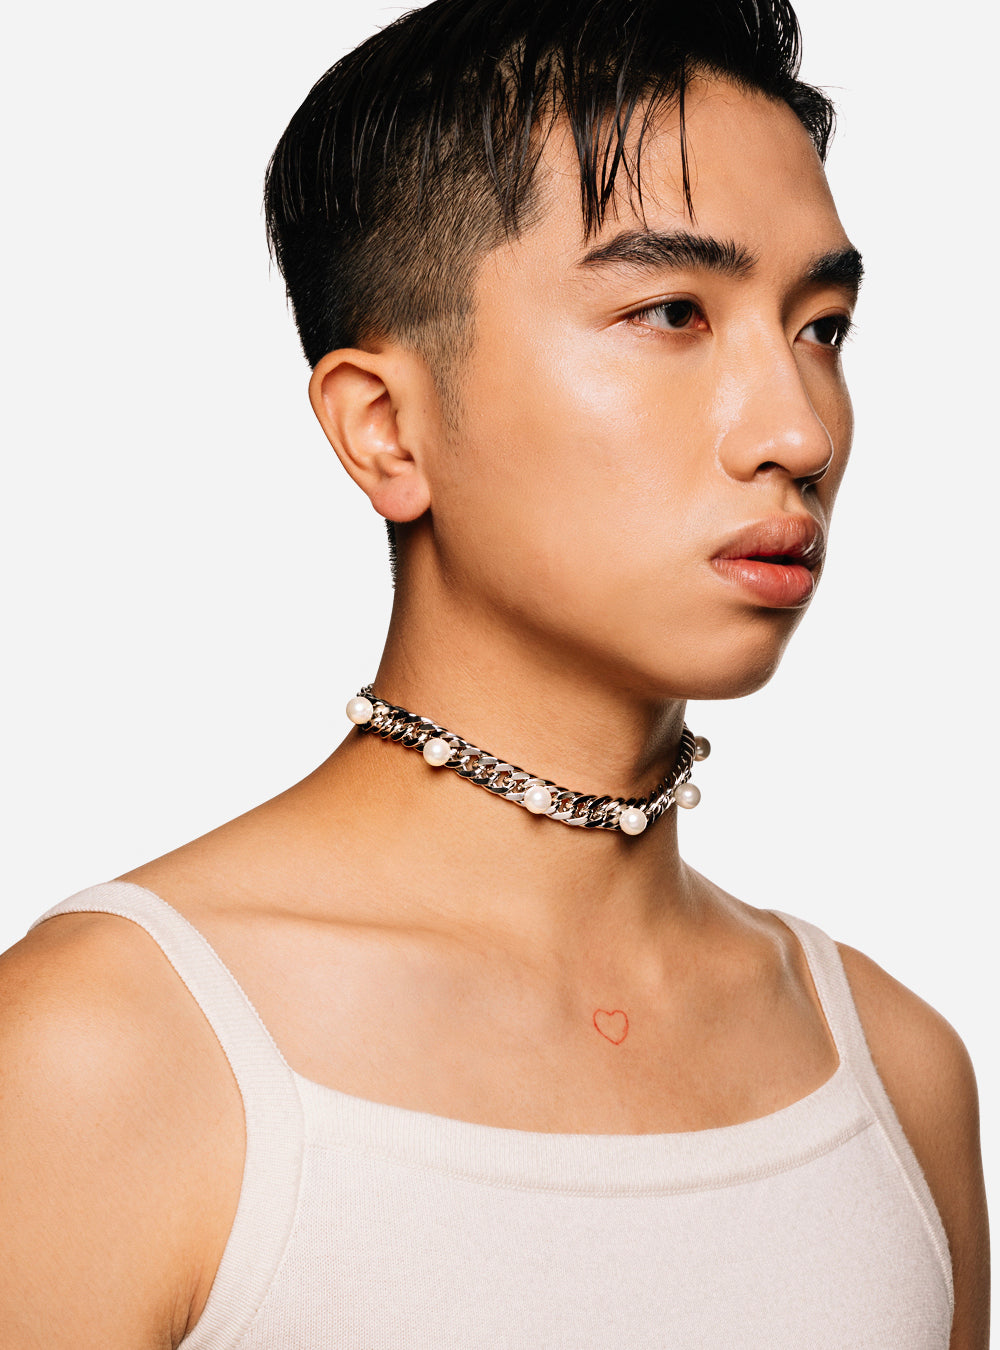 A man wearing a white tank top and a Pearls on curb-chain choker necklace by MIDNIGHTFACTORY.